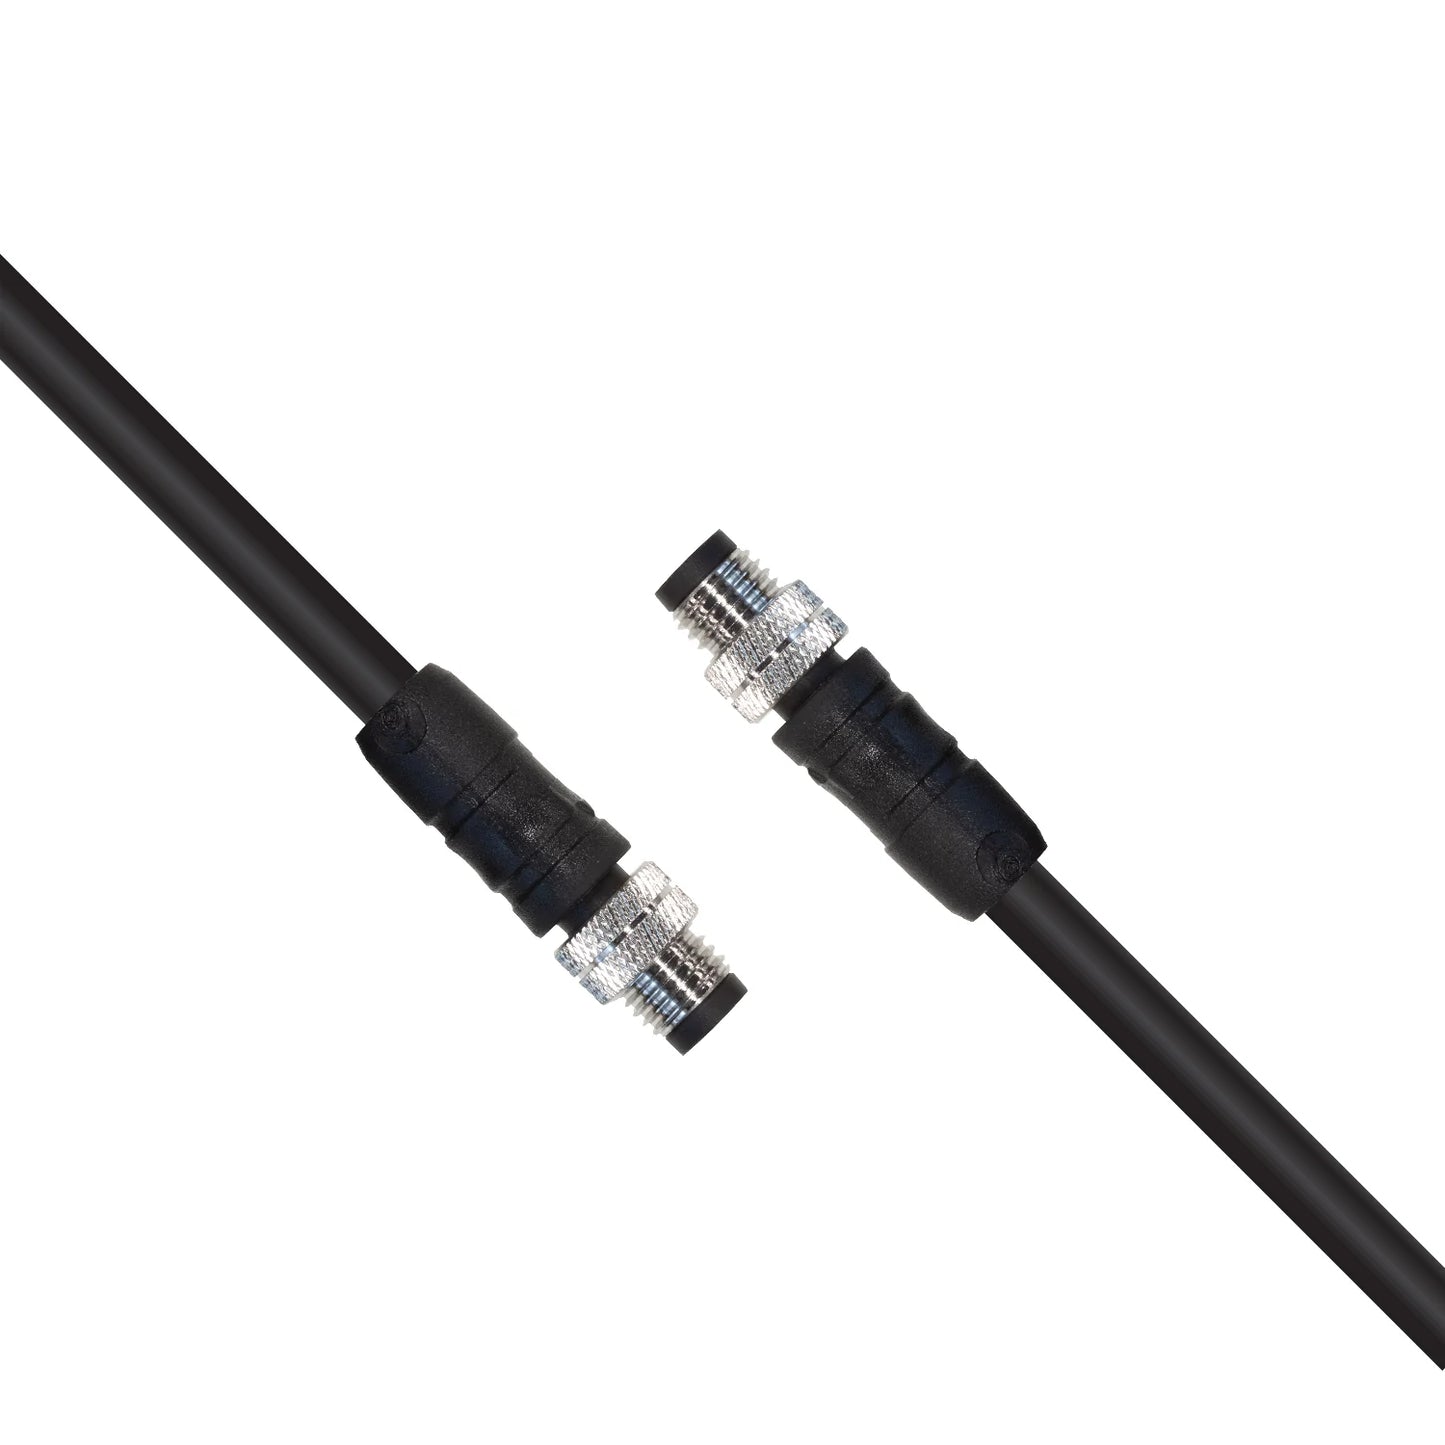 AUX cable for PoE devices, M8 male plugs